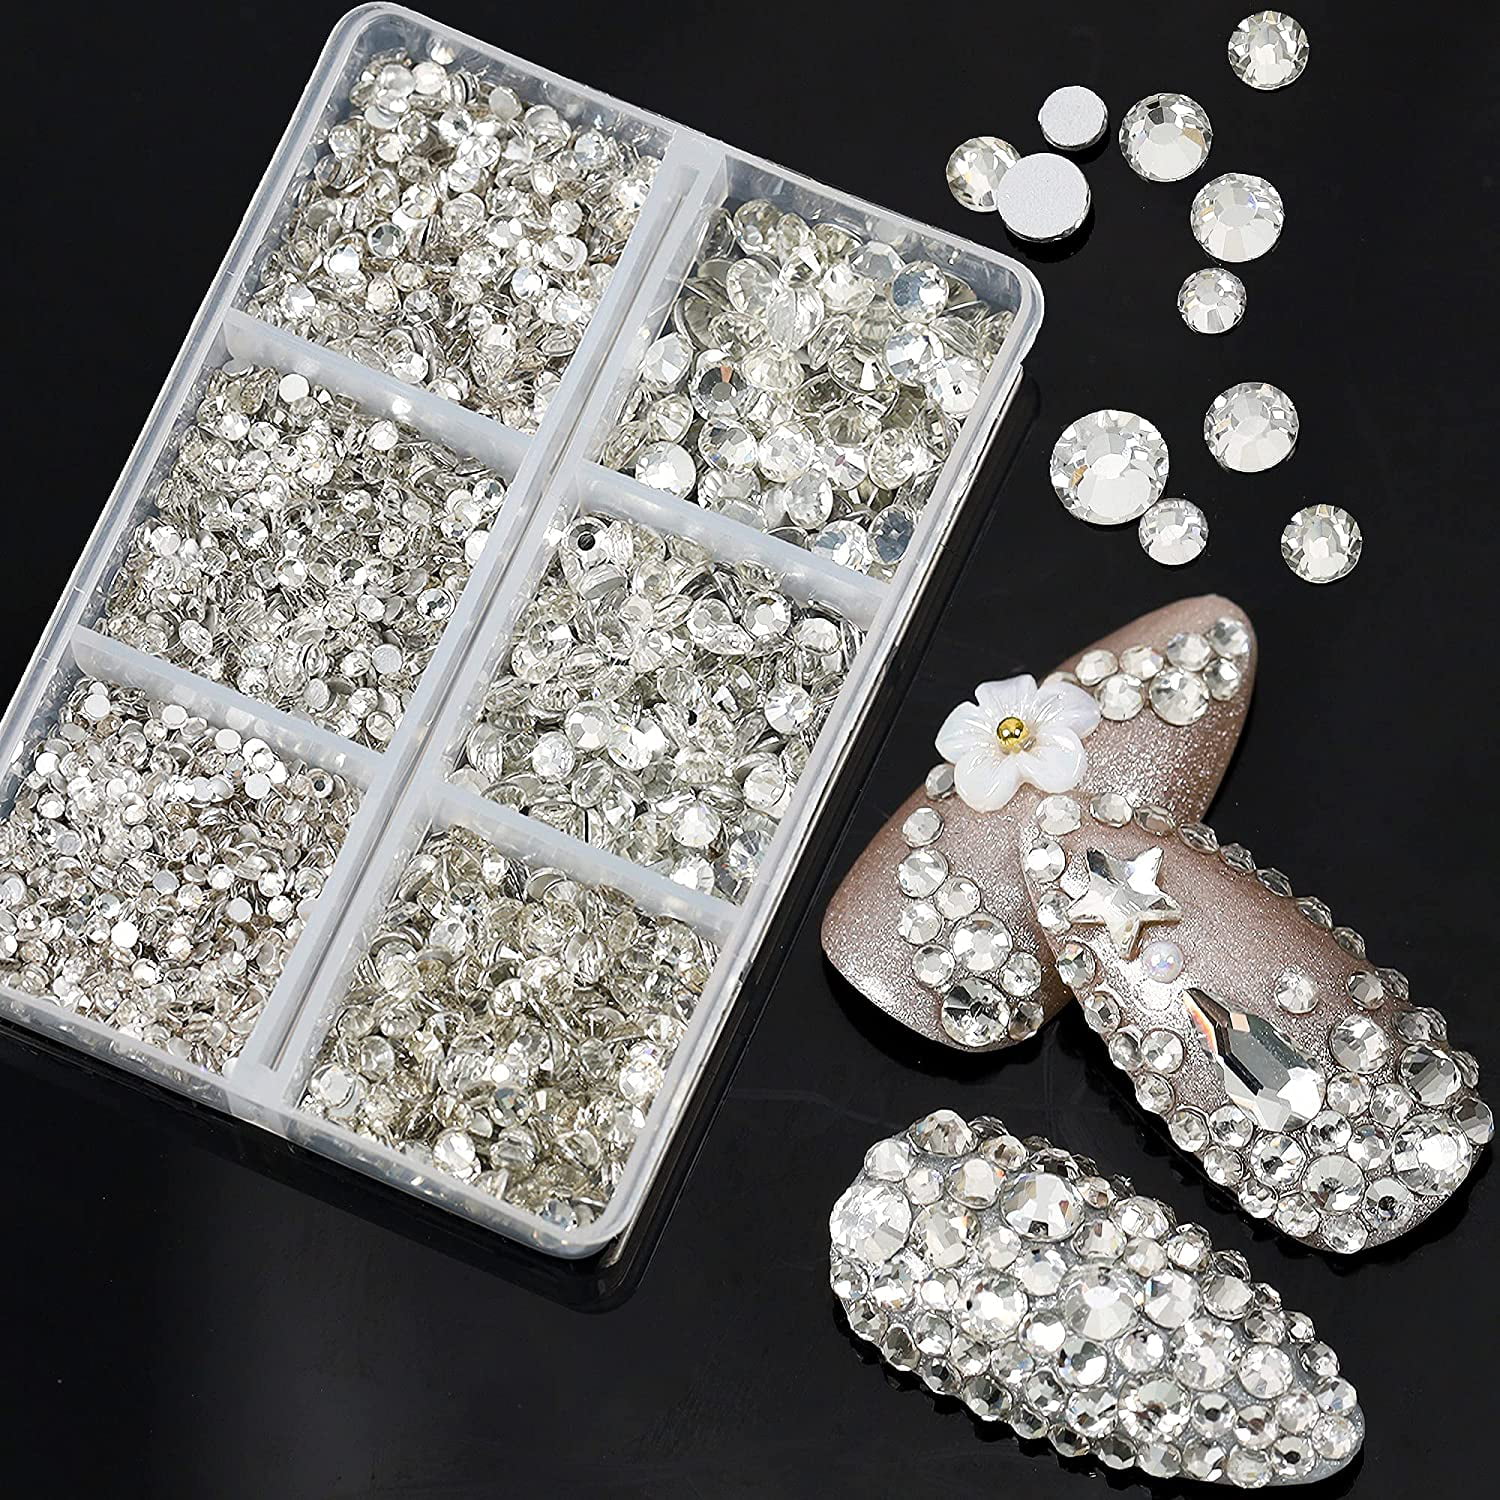  50000 Pieces Rhinestones Set for Crafts, Lorvain 3D Flat Back  Gem Charms Eyes Makeup Round Crystal Stones Diamond Rhinestone Decoration  for Shoes Clothes DIY Manicure Supplies (Laser)